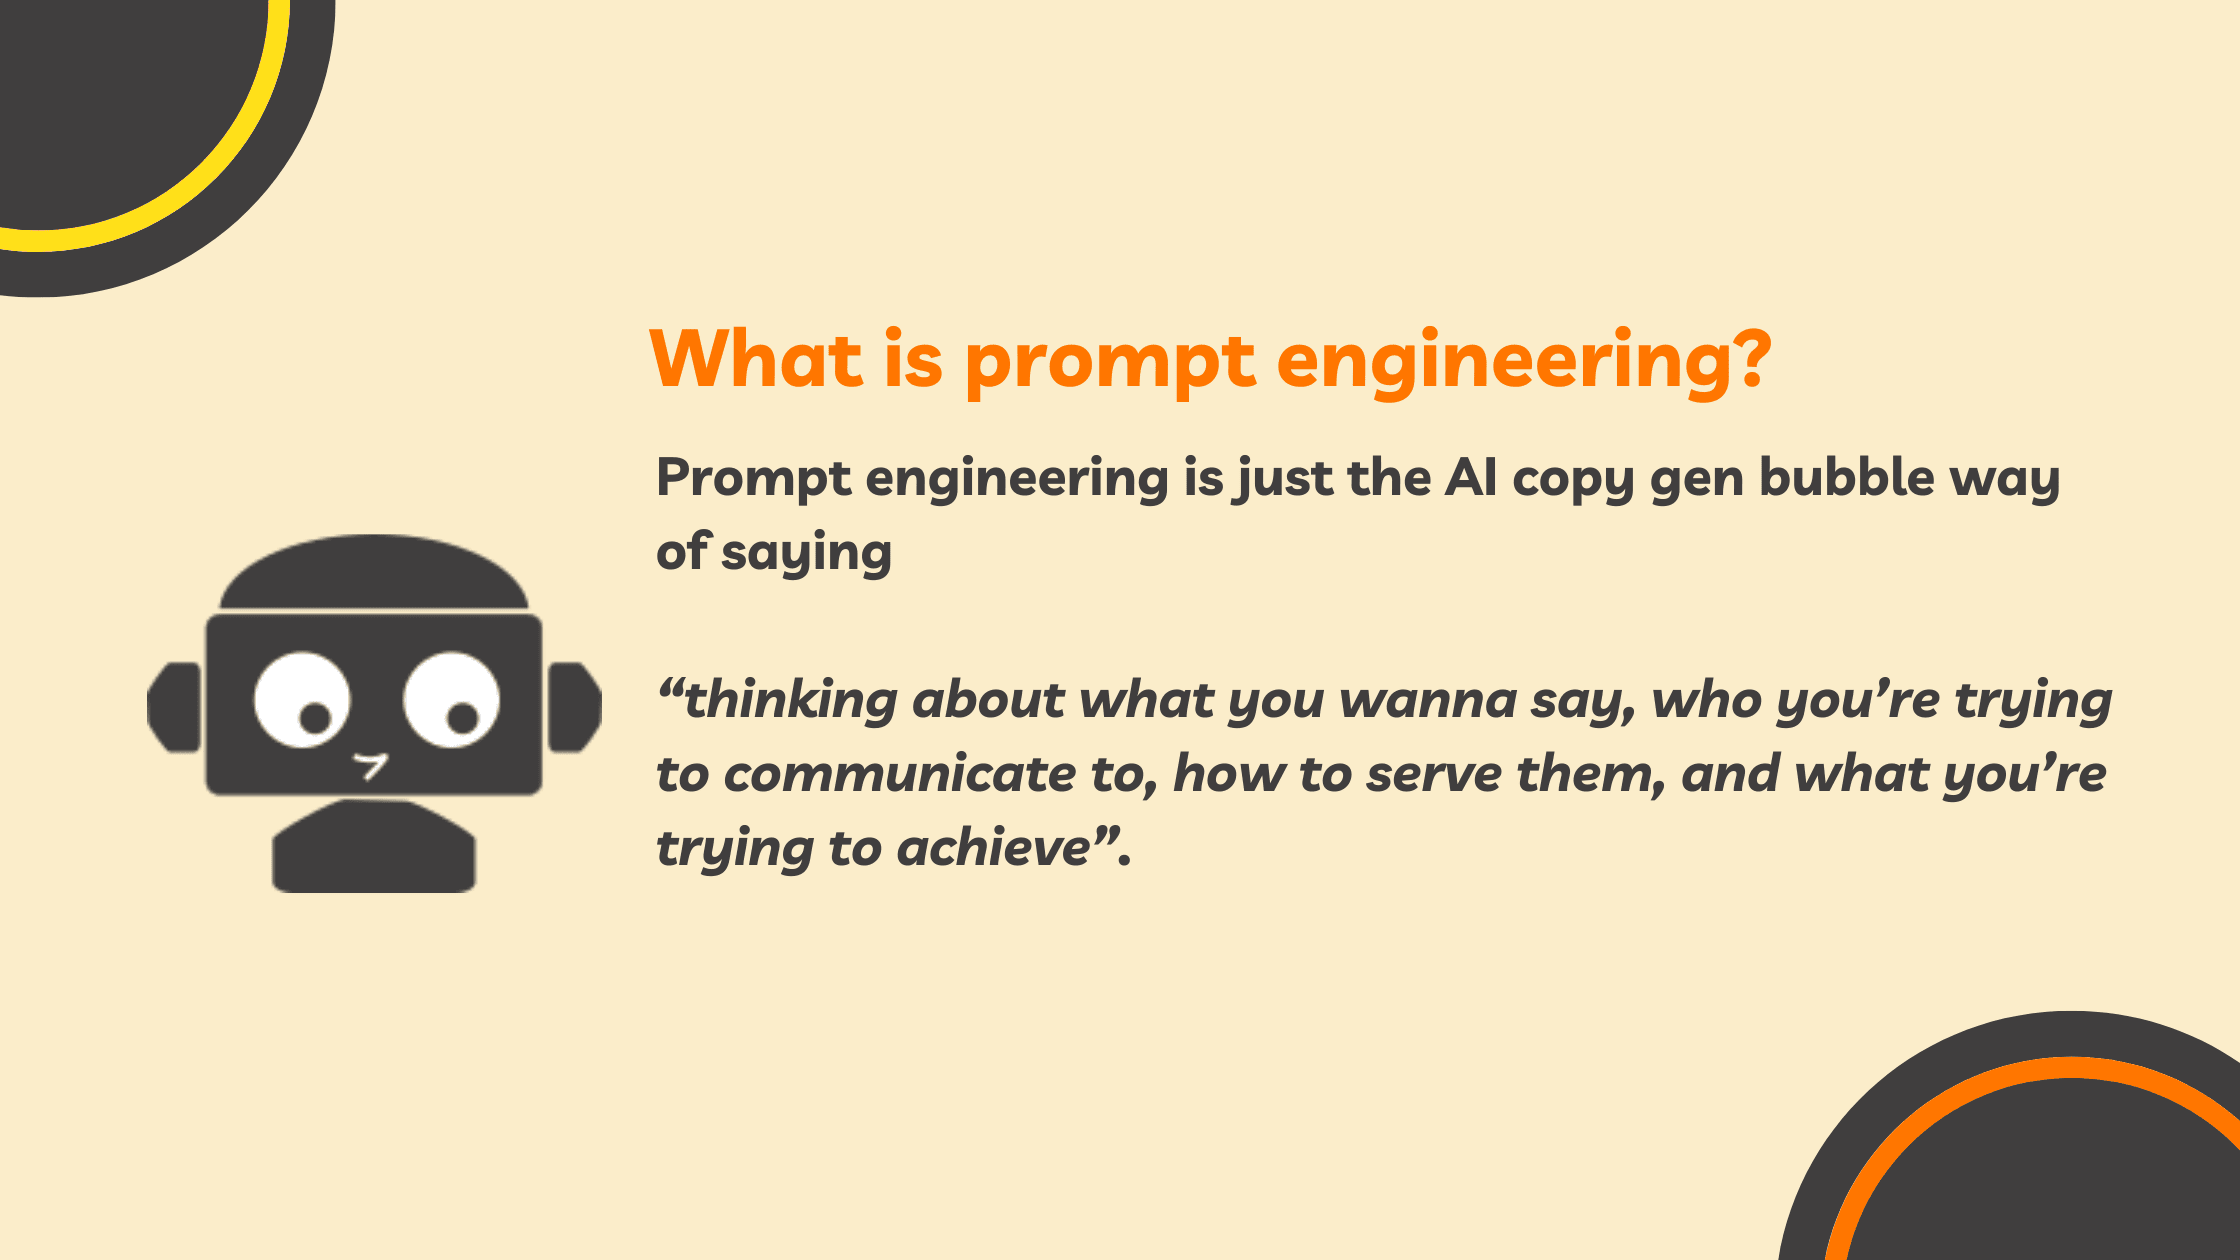 What is prompt engineering